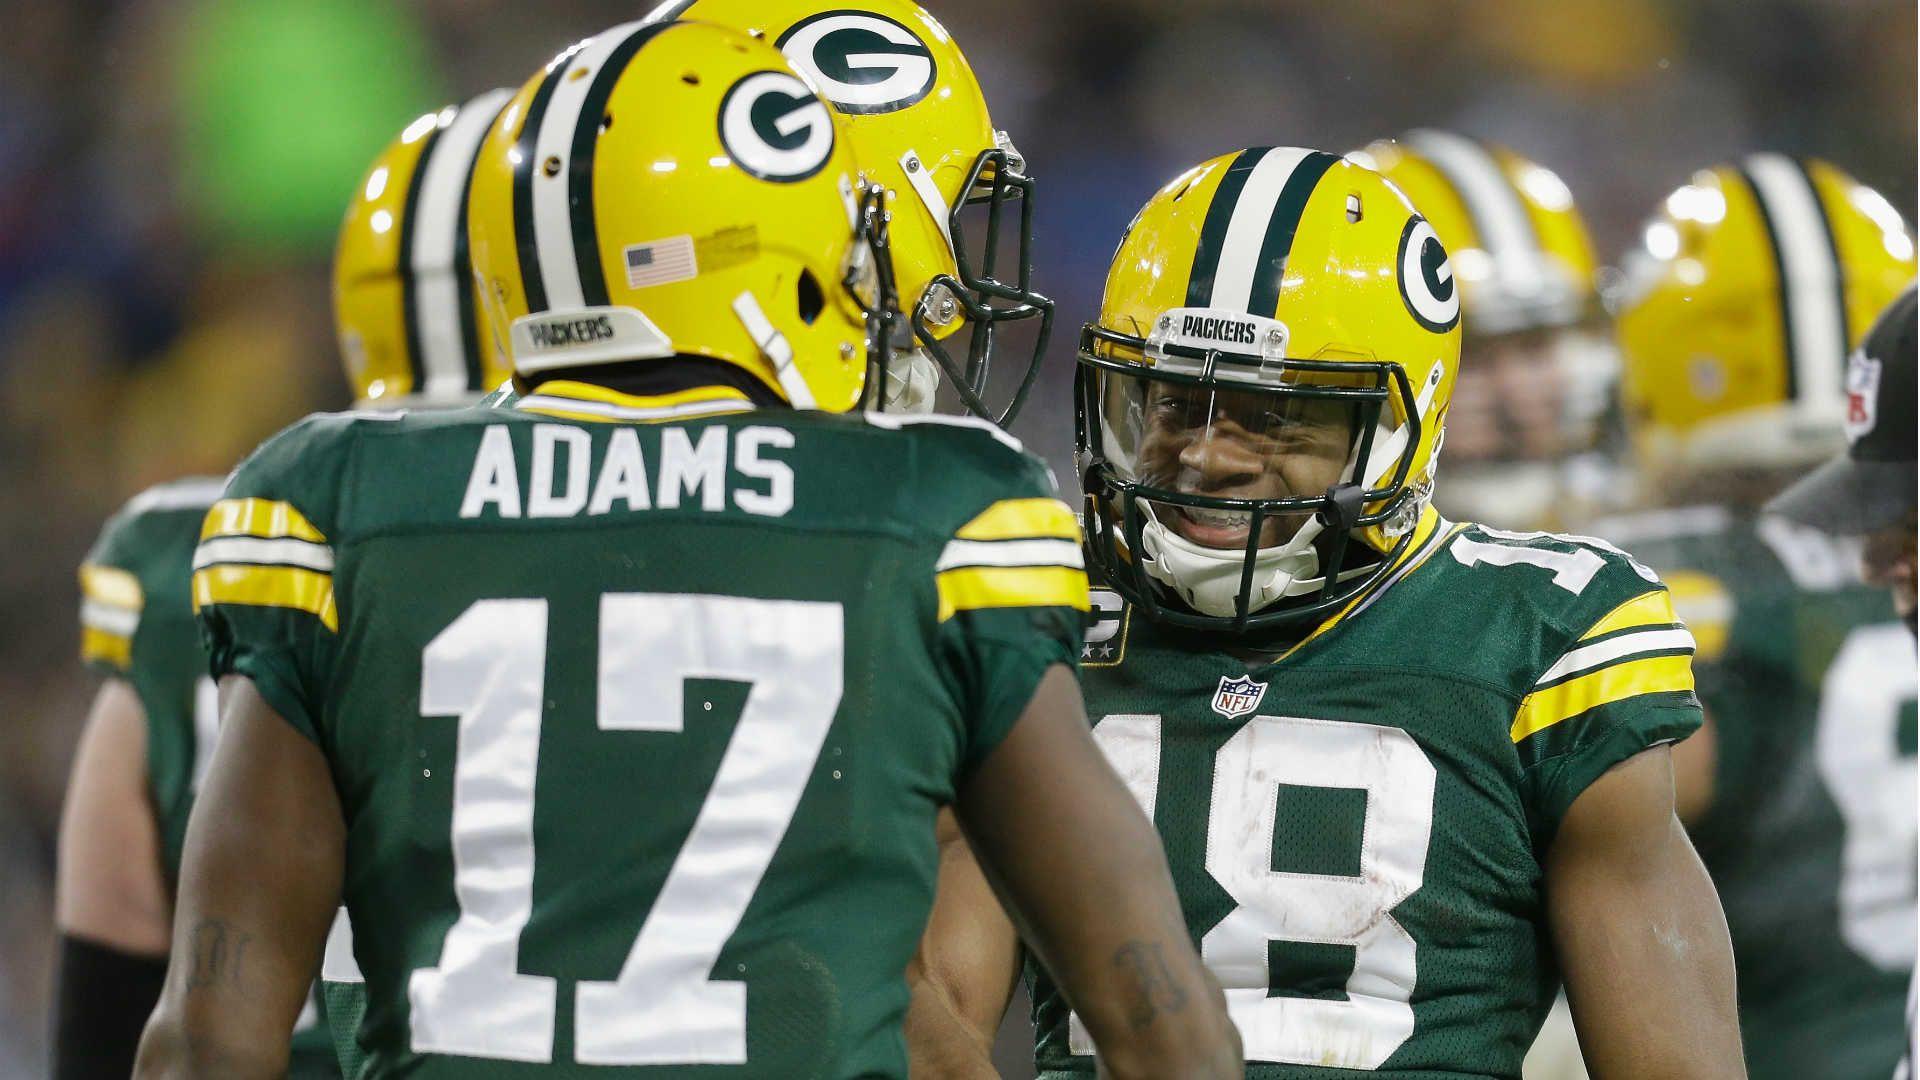 Jordy Nelson's torn ACL upgrades fantasy outlook for Cobb, Adams